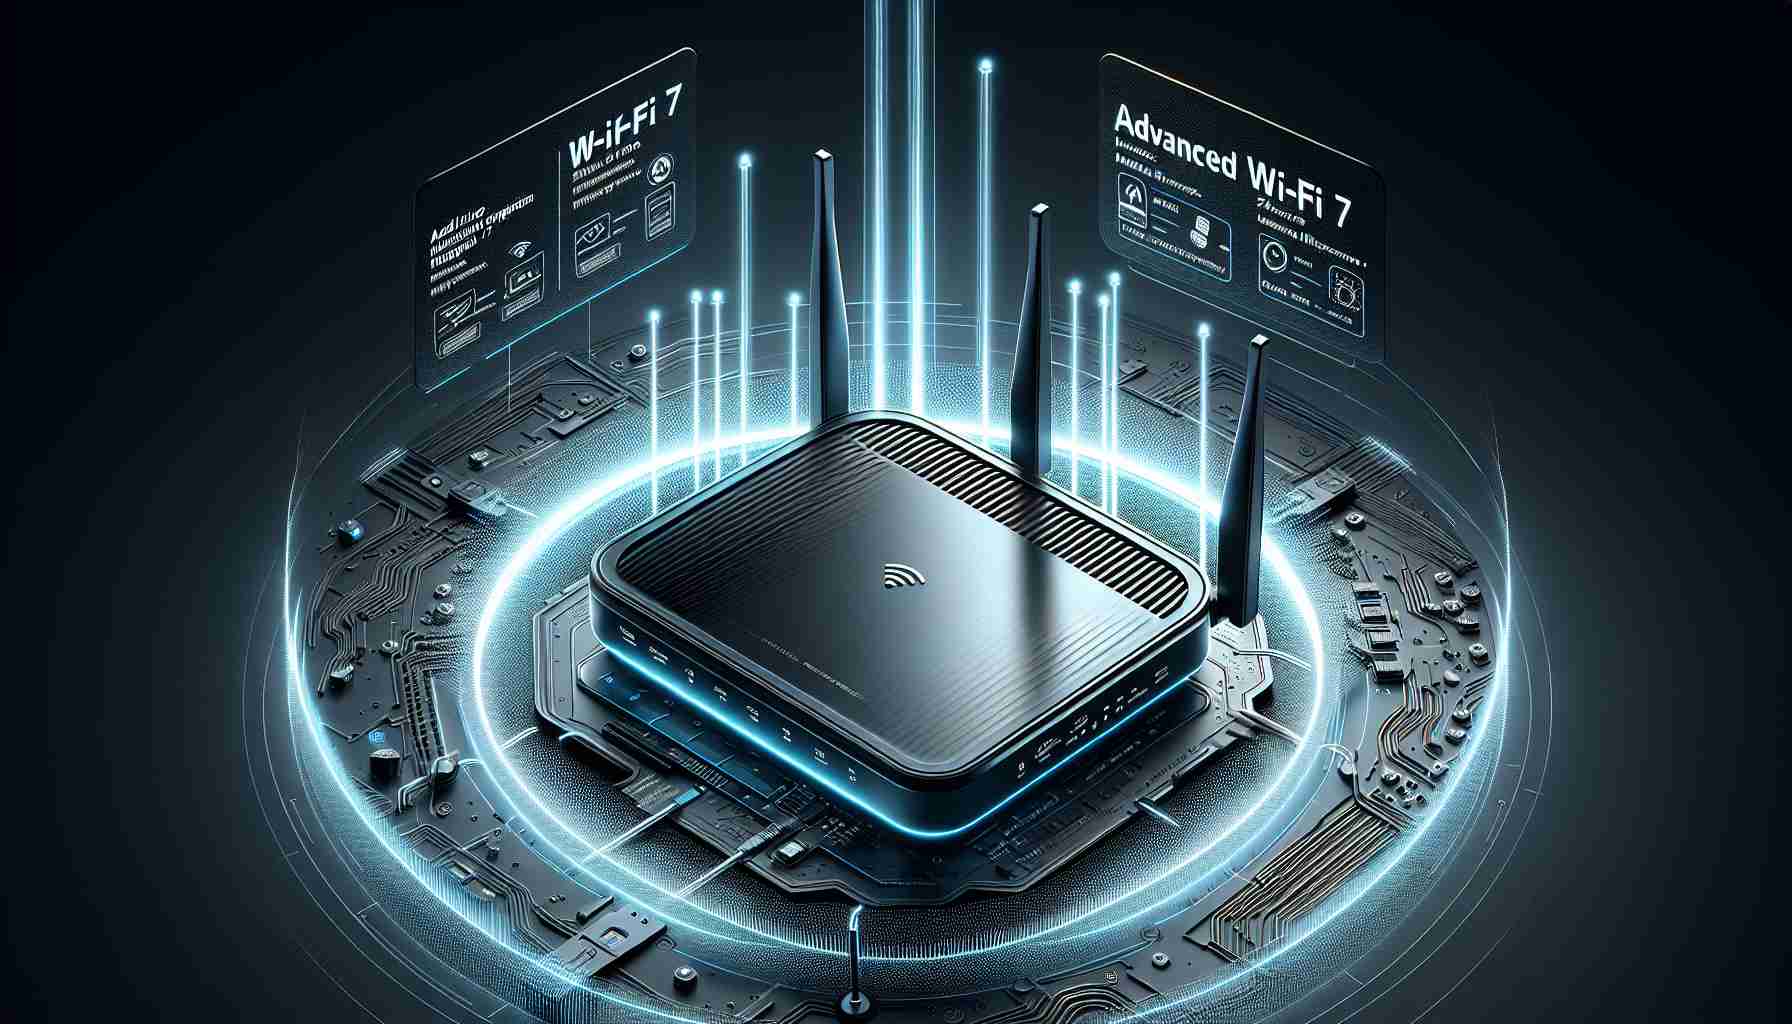 Xiaomi Introduces BE5000 Router with Advanced Wi-Fi 7 Support